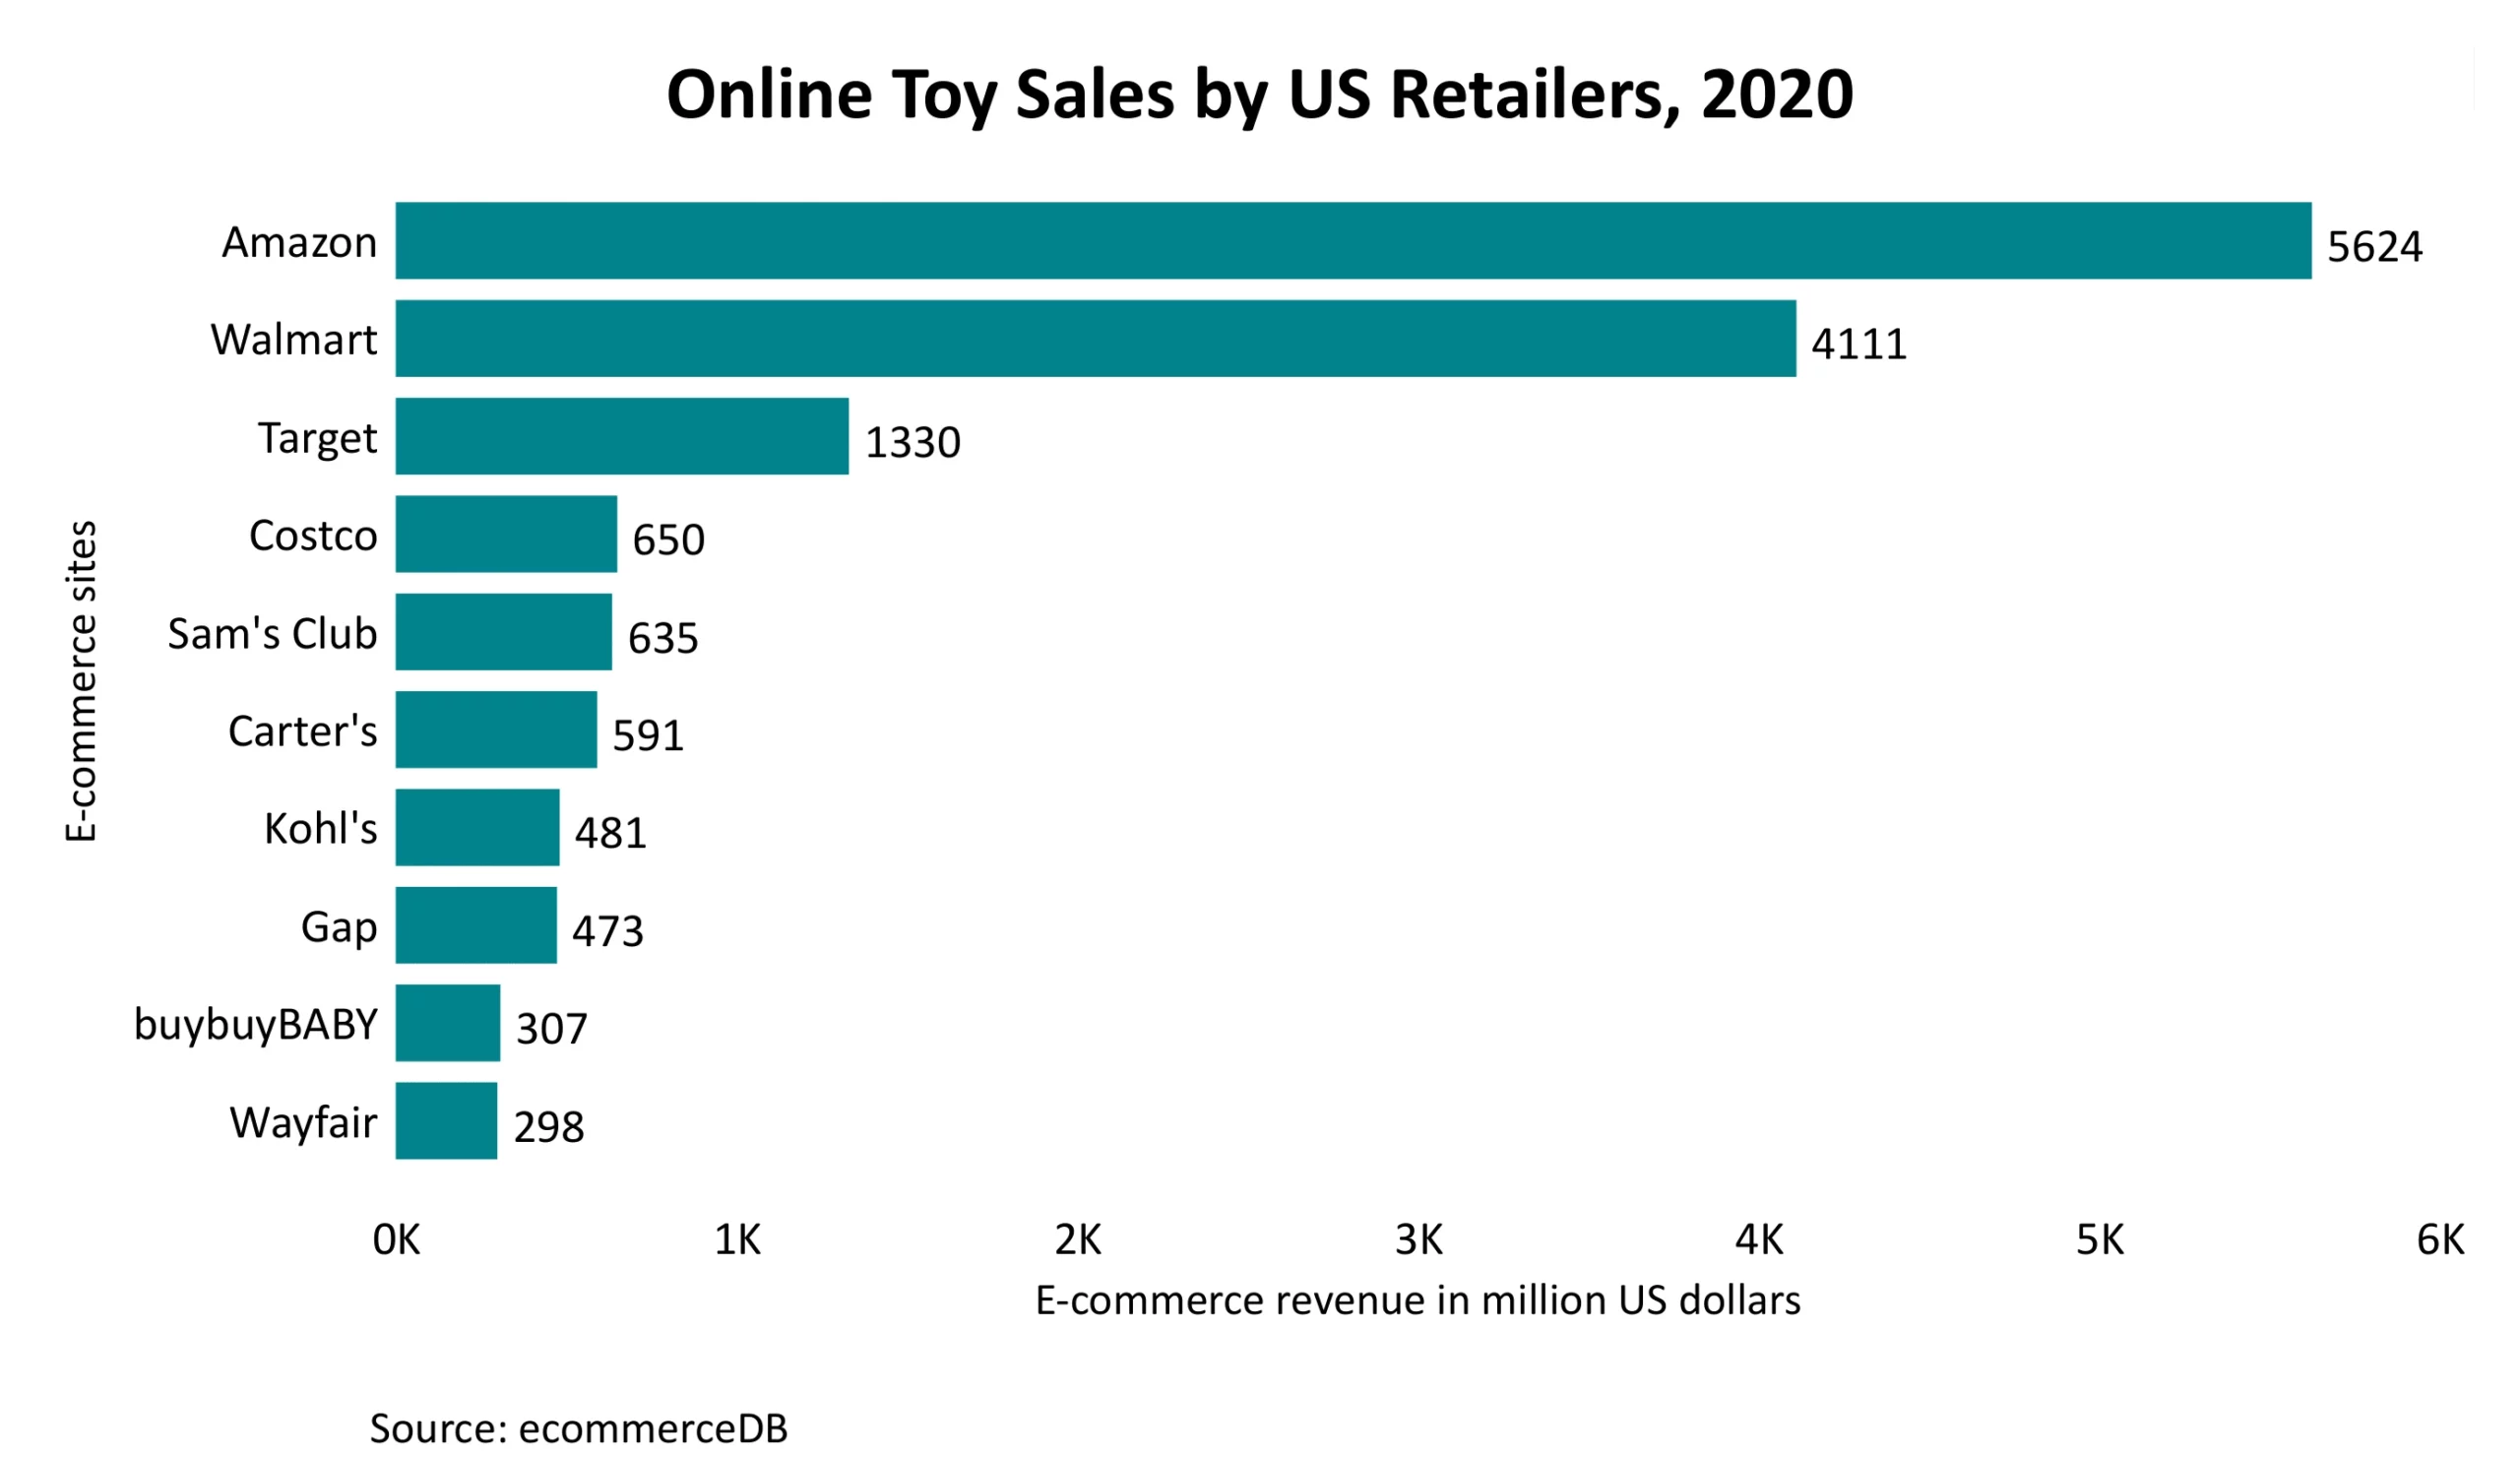 Online Toy Sales by US Retailers in 2020